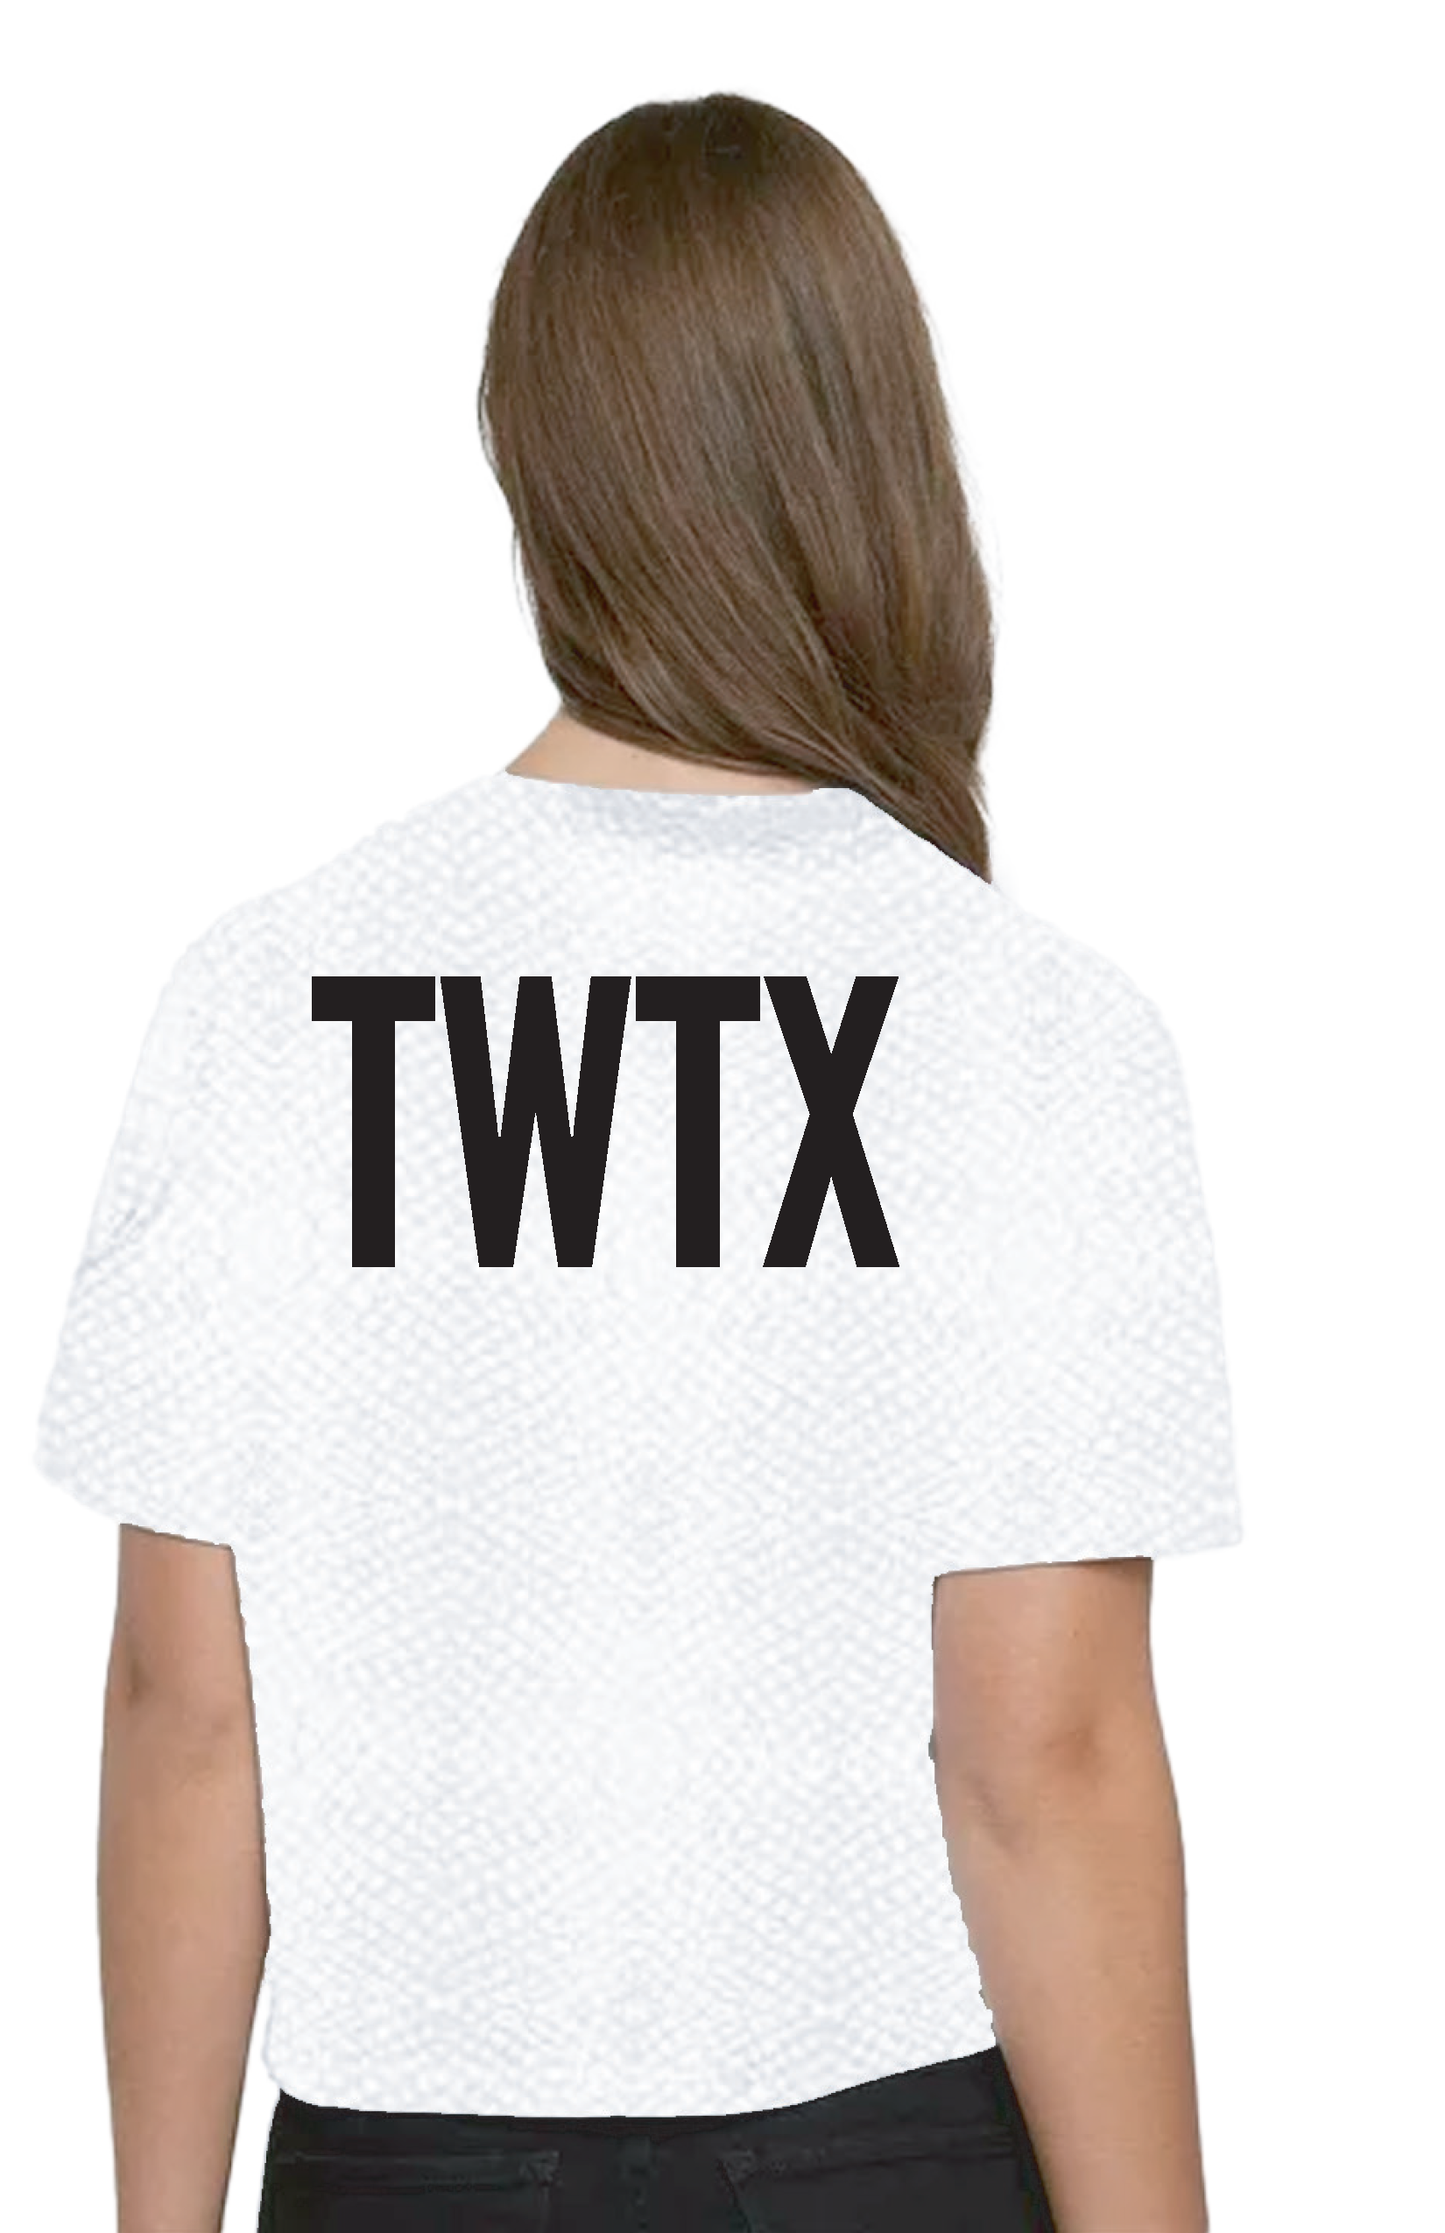 TWTX Cropped Tee